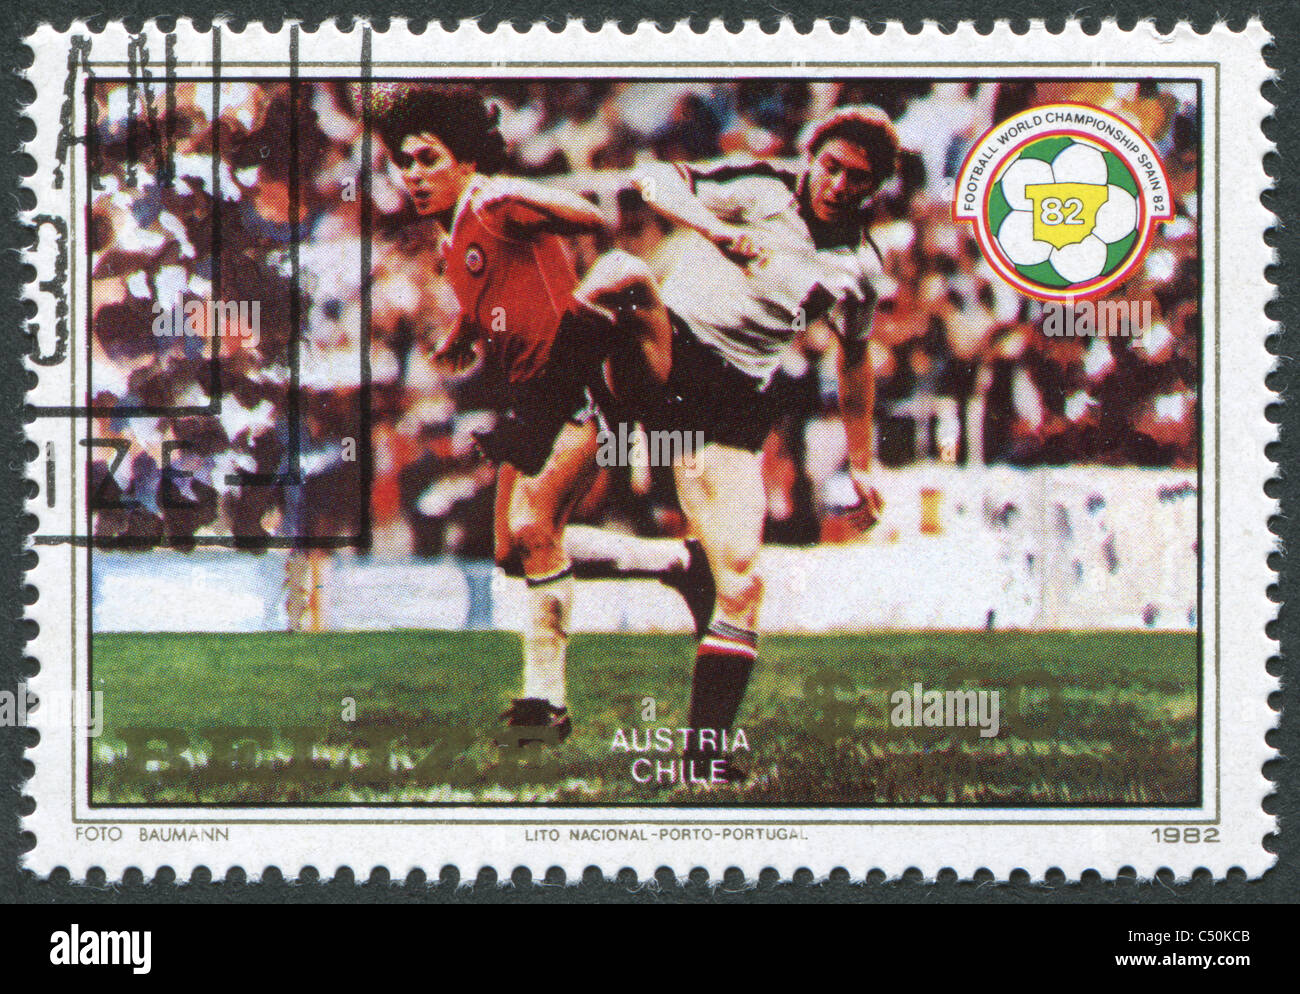 BELIZE 1982: A stamp printed in the Belize, is dedicated to FIFA World Cup 1982 in Spain, shows a match between Austria - Chile Stock Photo